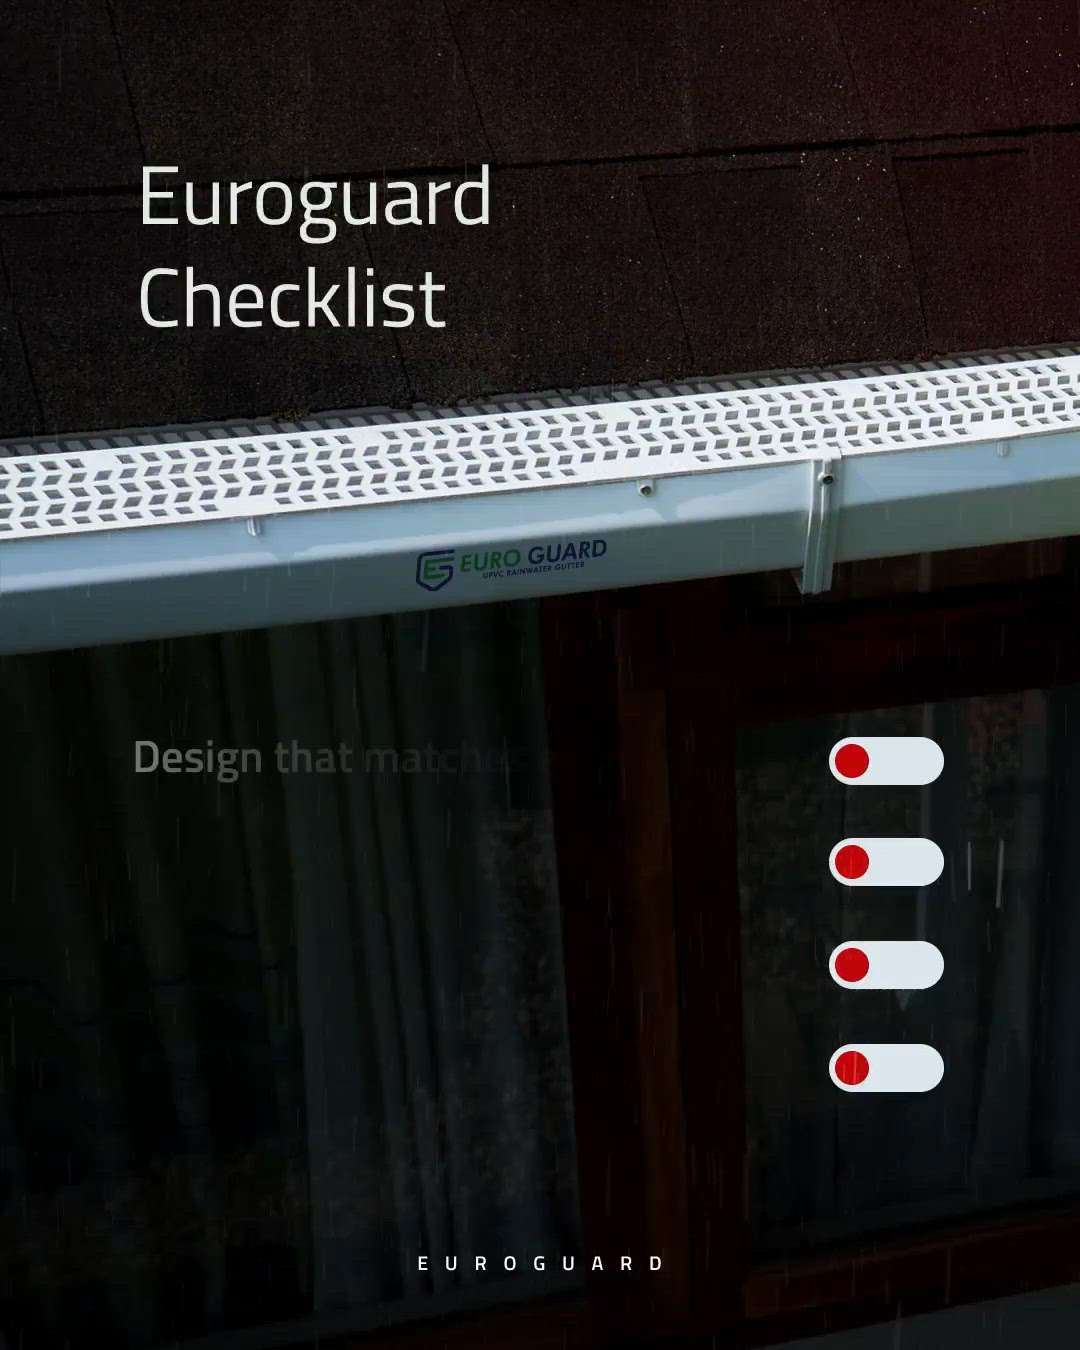 Make sure you don't miss anything on the checklist! With Euro Guard, you get a single solution for all your gutter concerns. From the aesthetic design to the high water-carrying capacity, Euro Guard rainwater gutters provide everything you need to resist rain!.
#EuroGuard #rainwatergutters #EuroGuardRainwaterGutters #monsoon #brandstorepost